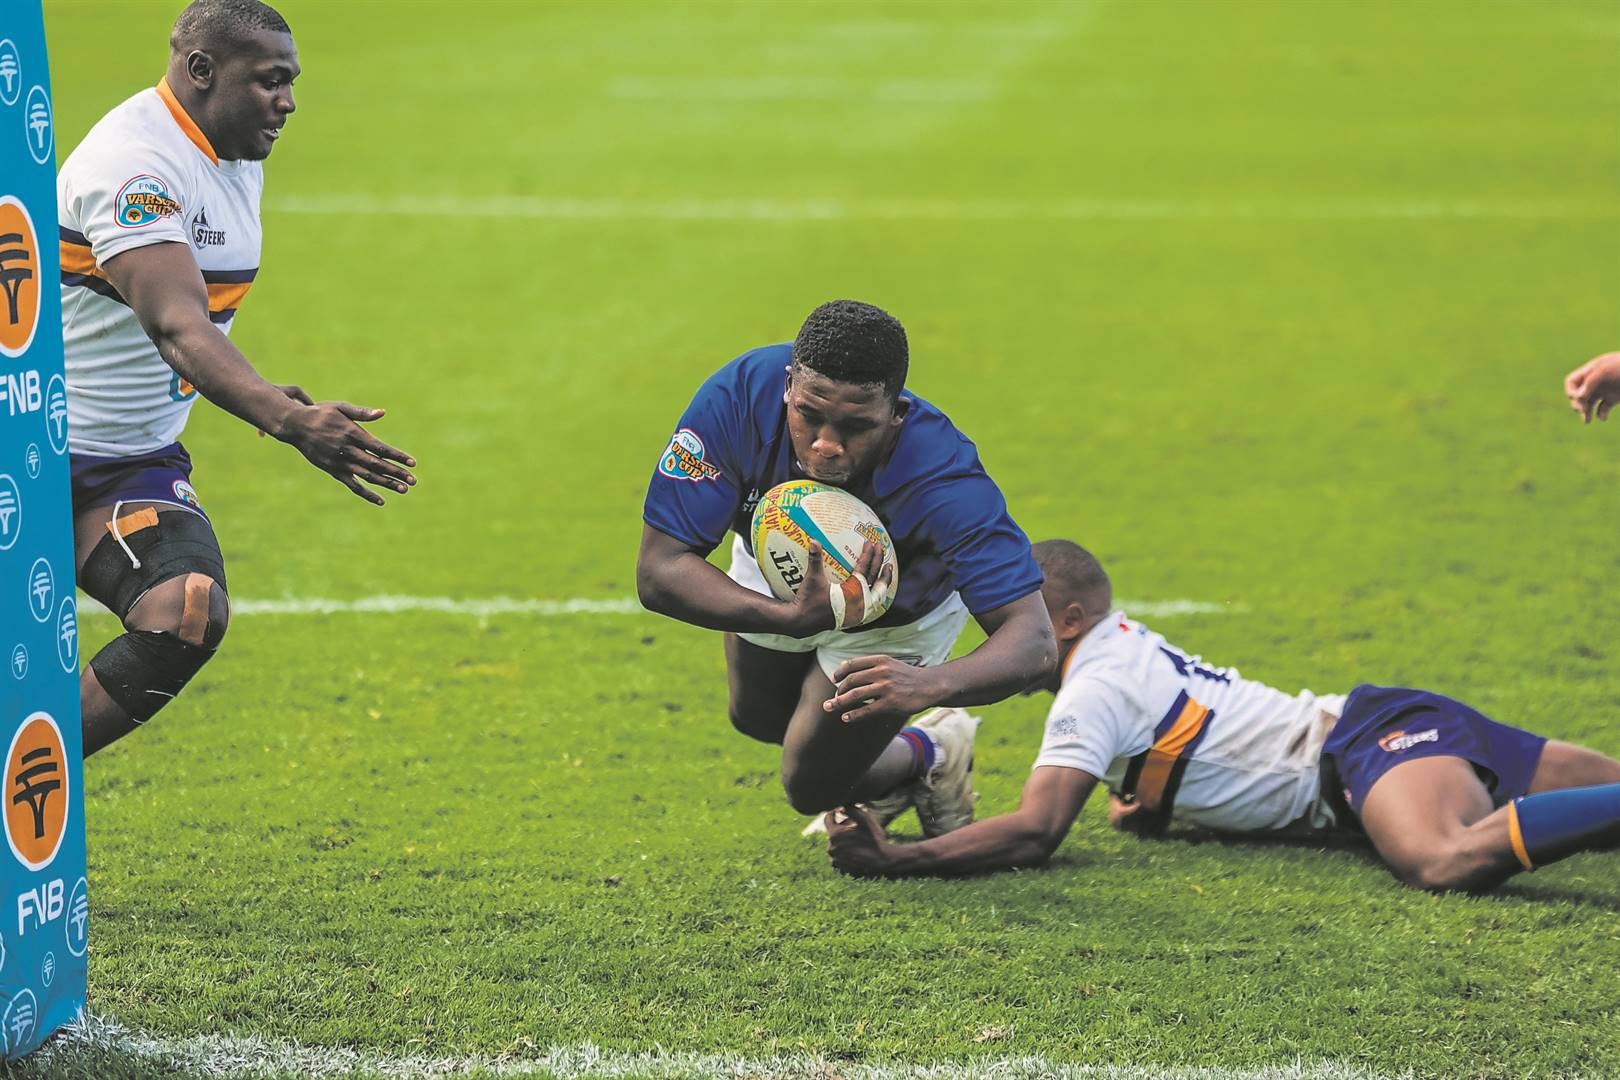 Liyema Mgwigwi of the Shimlas goes over for a try during the FNB Varsity Cup Rugby match between Wits and Shimlas at the Wits Rugby Stadium on Monday, 8 April.photo: Varsity Sports